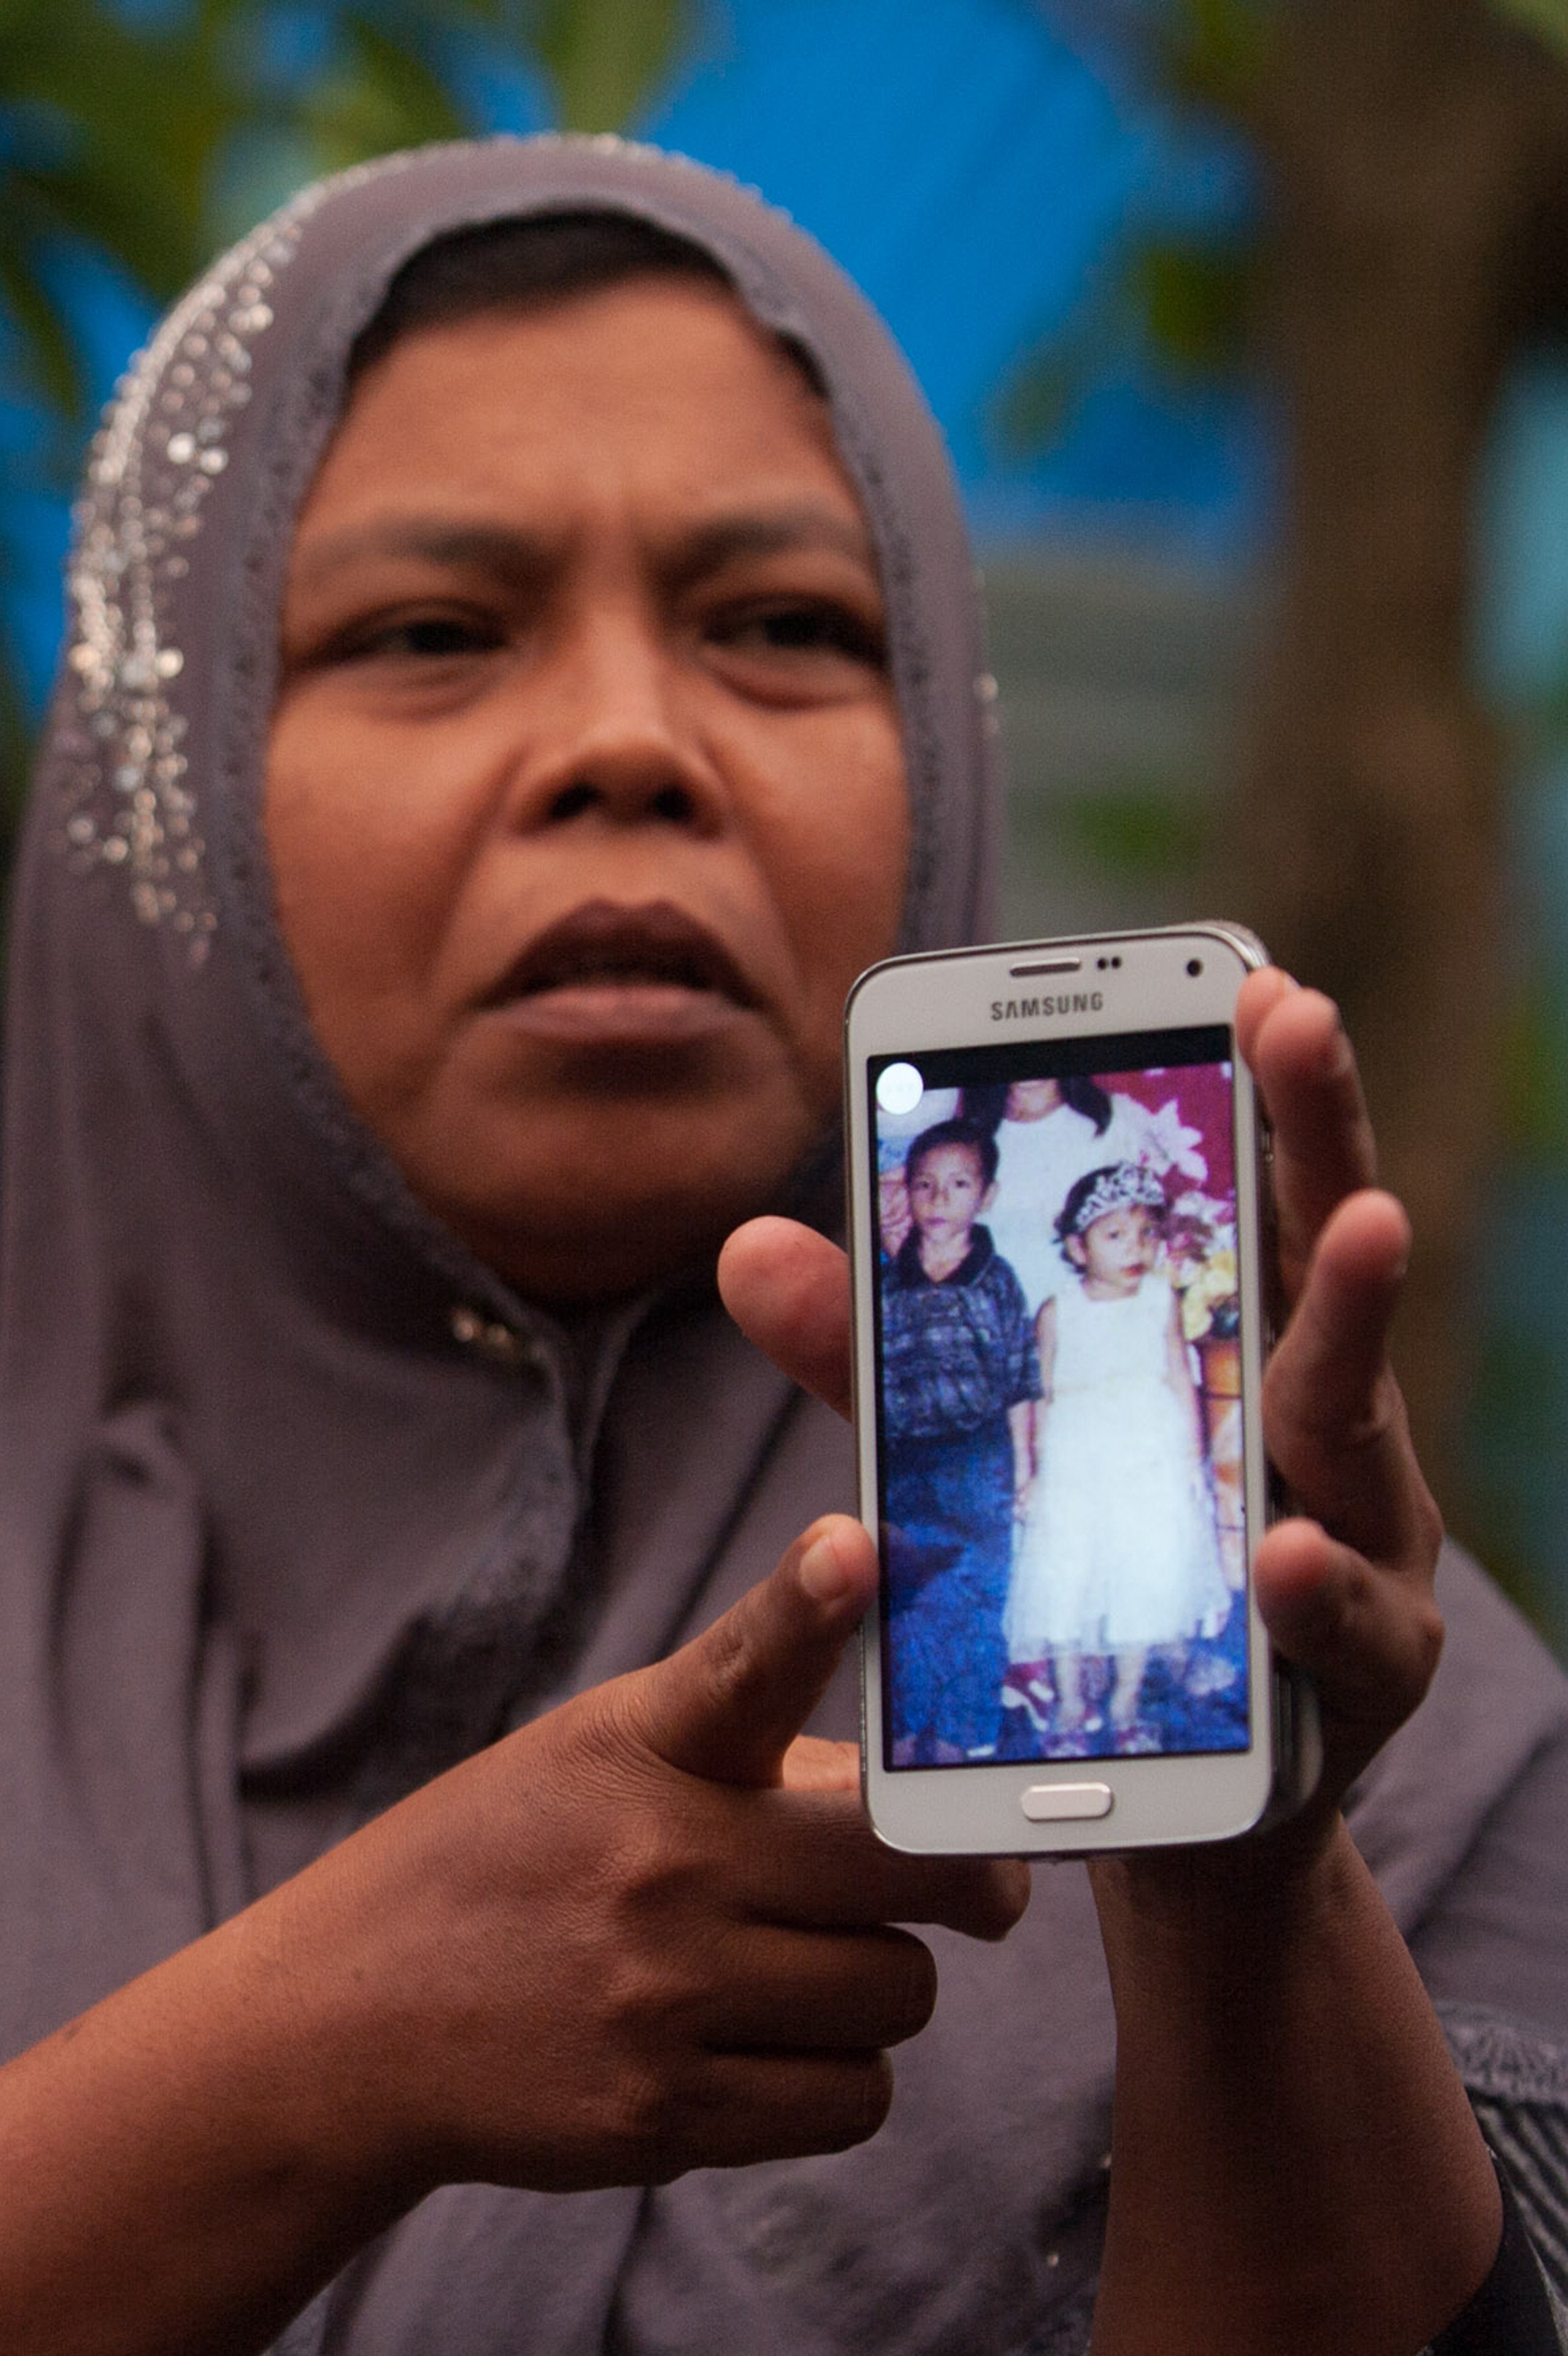 Indonesian mother Jamaliah displays a picture taken before the 2004 tsunami of her two missing children, daughter Raudhatul Jannah (R) and son Arif Pratama Rangkuti (L). Photo: Chaideer Mahyuddin//AFP/Getty Images.